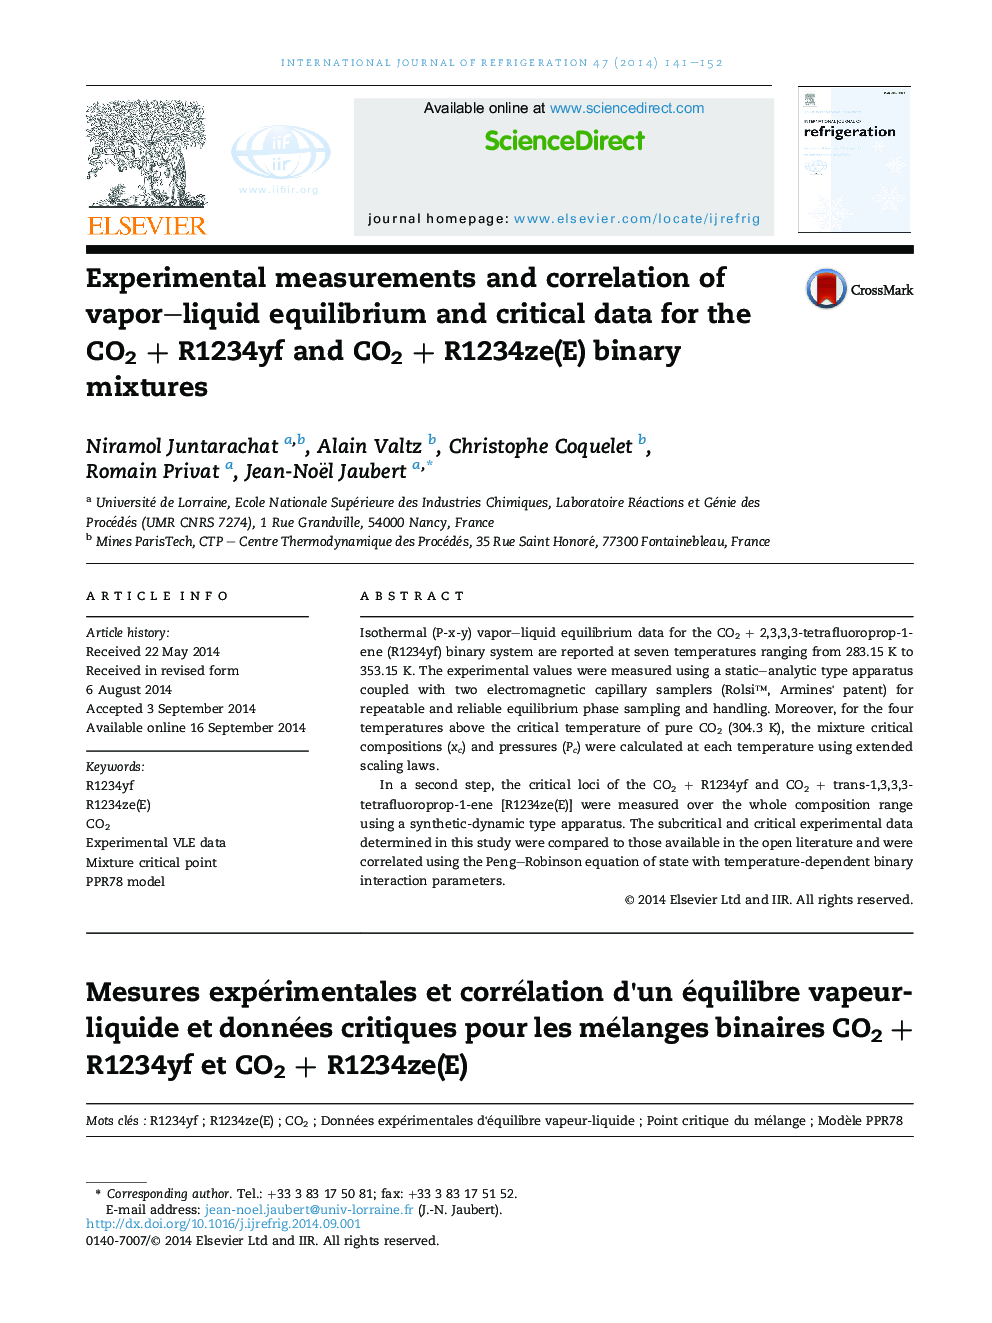 Experimental measurements and correlation of vapor–liquid equilibrium and critical data for the CO2 + R1234yf and CO2 + R1234ze(E) binary mixtures